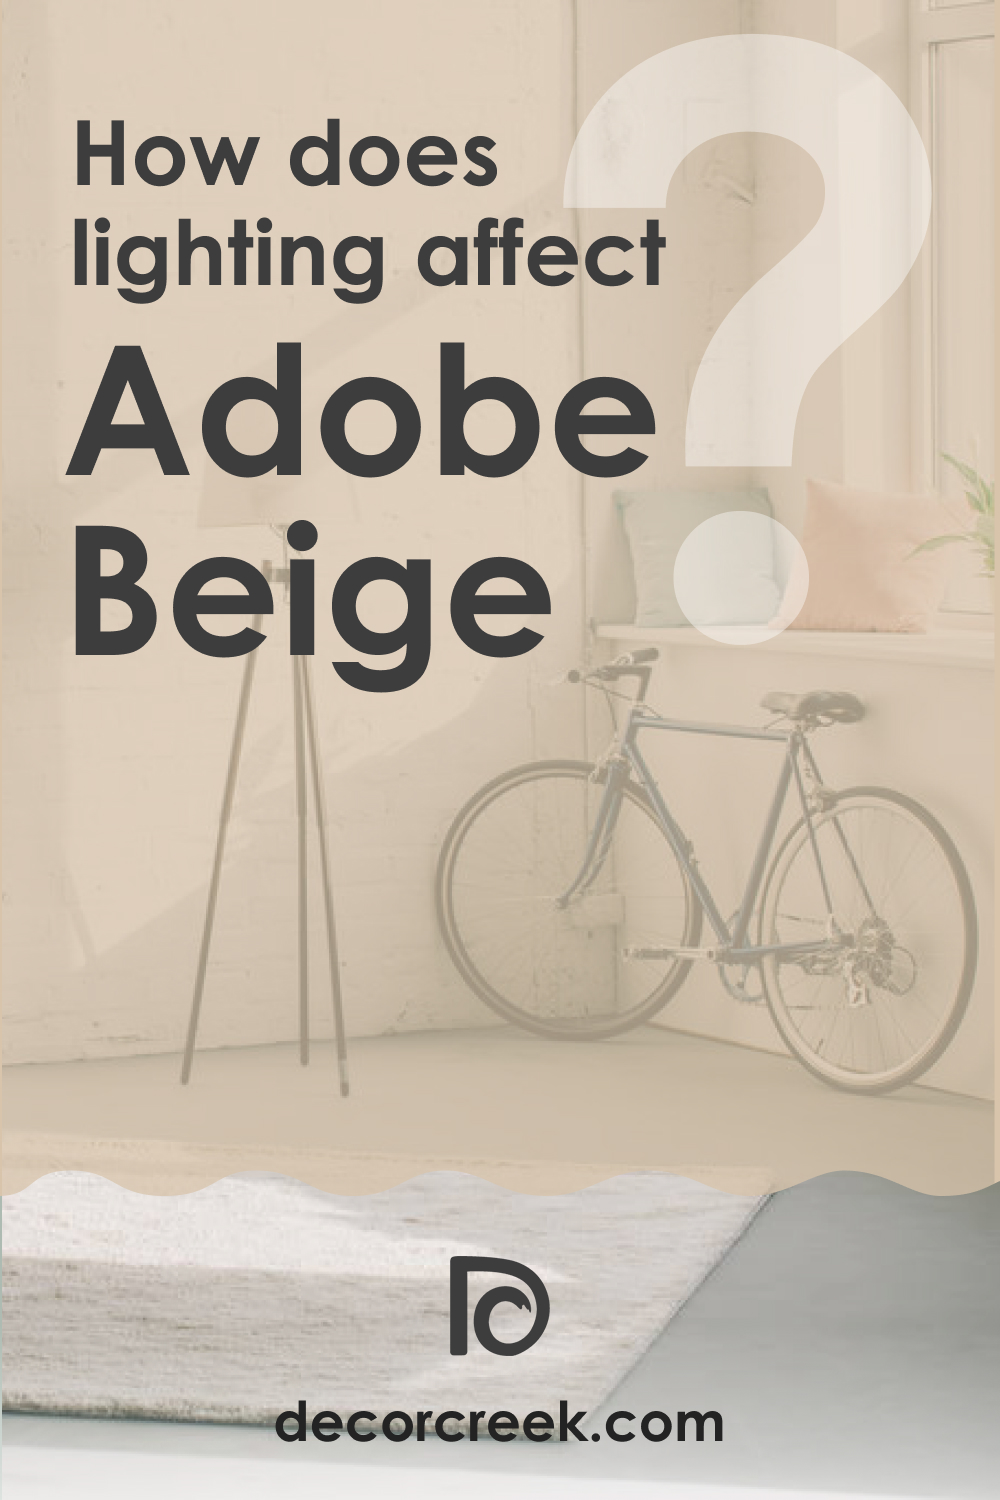 How Does Lighting Affect Adobe Beige AC-7?